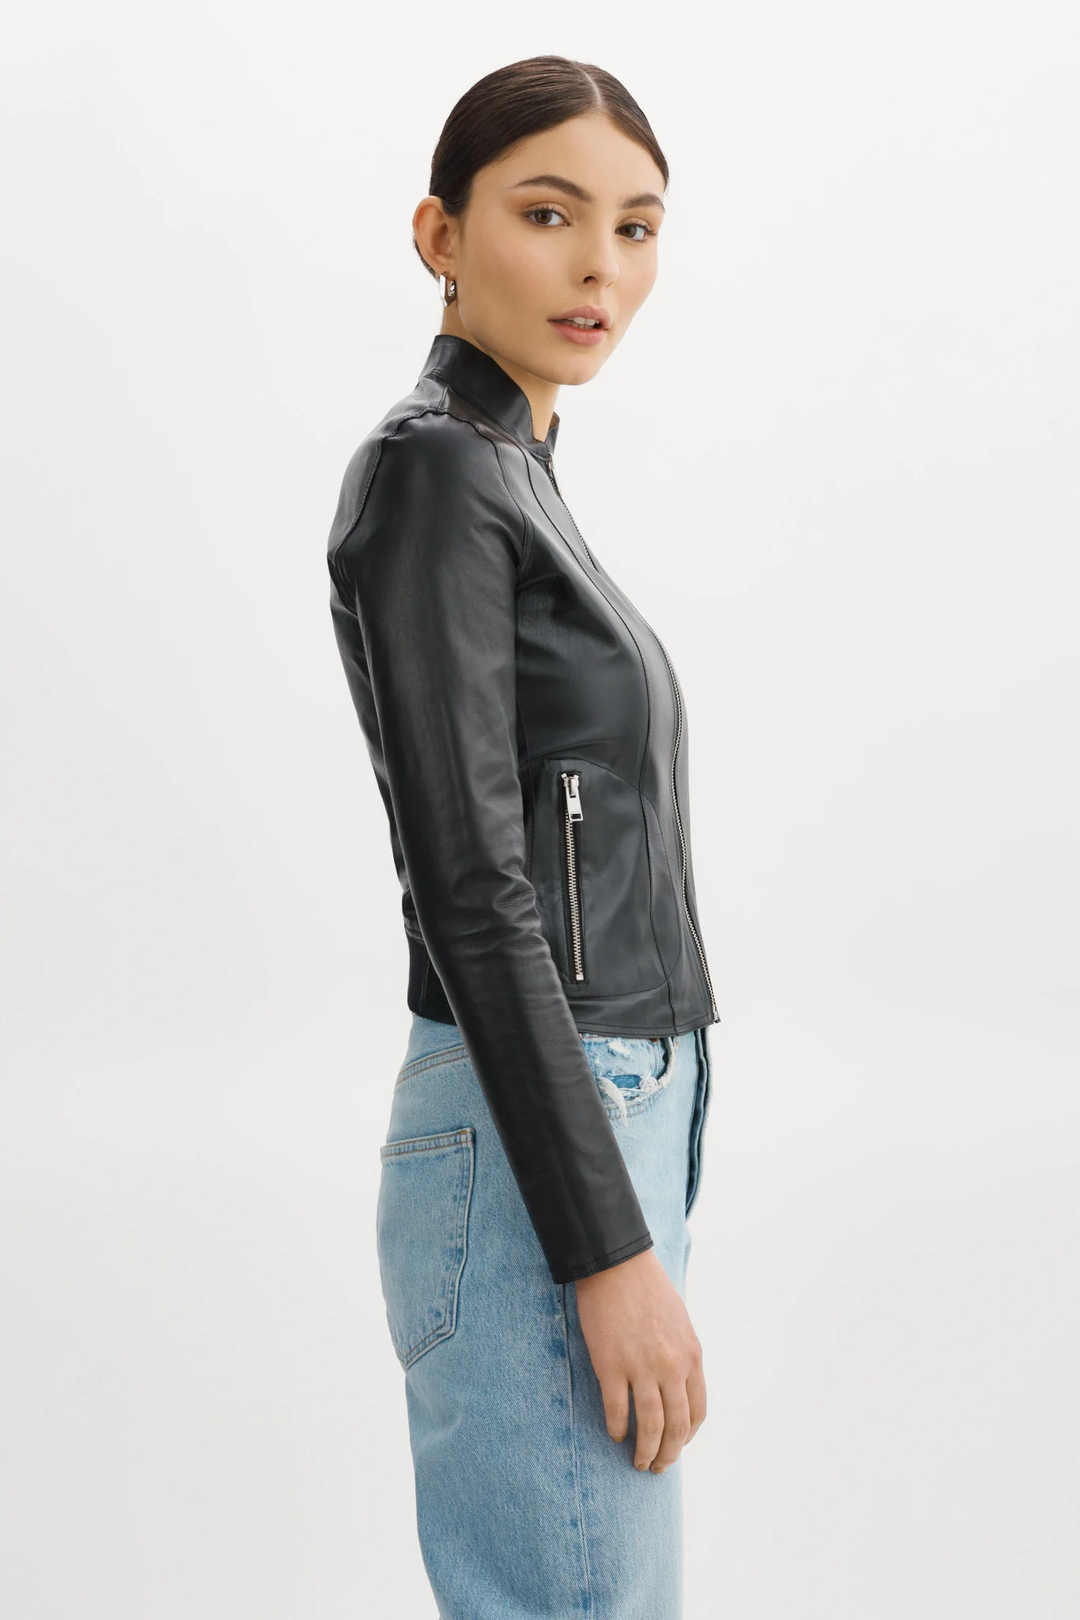 LAMARQUE - Chapin Reversible Leather Bomber in Black/Silver